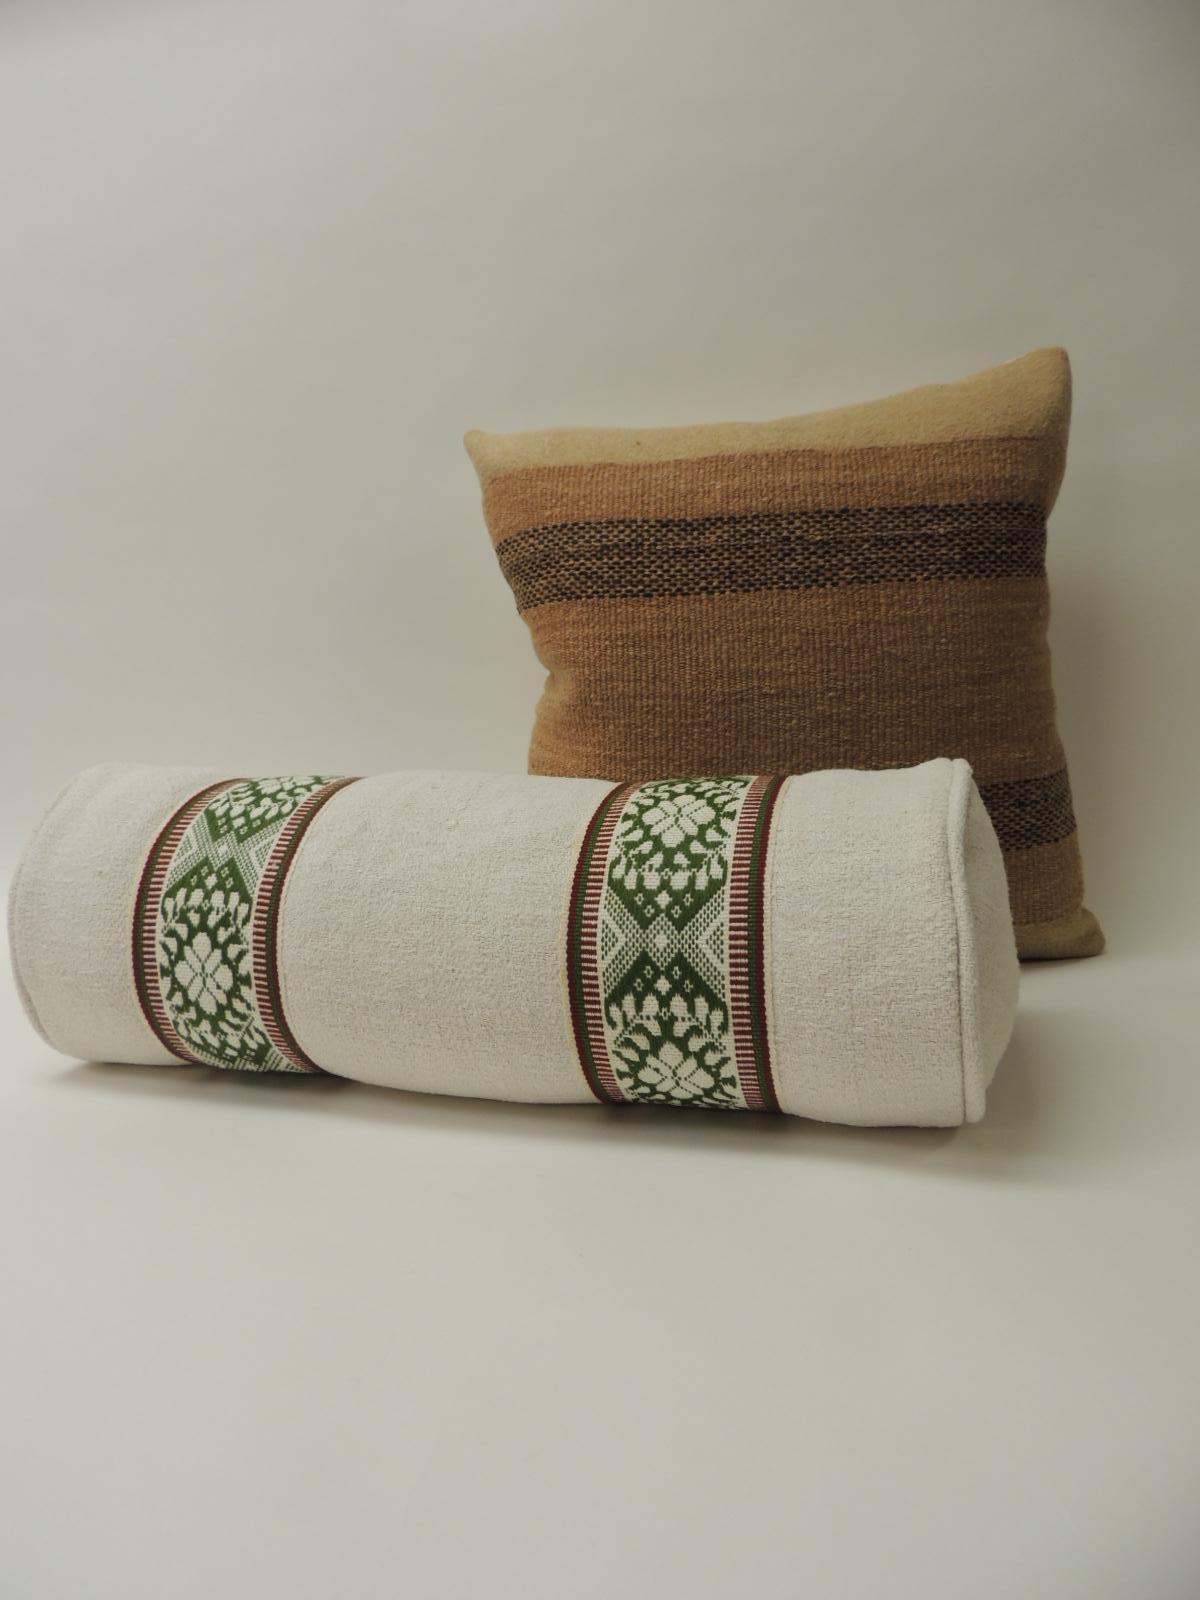 Hand-Crafted Vintage Green and Natural Woven Trim Decorative Round Roll Bolster Pillow